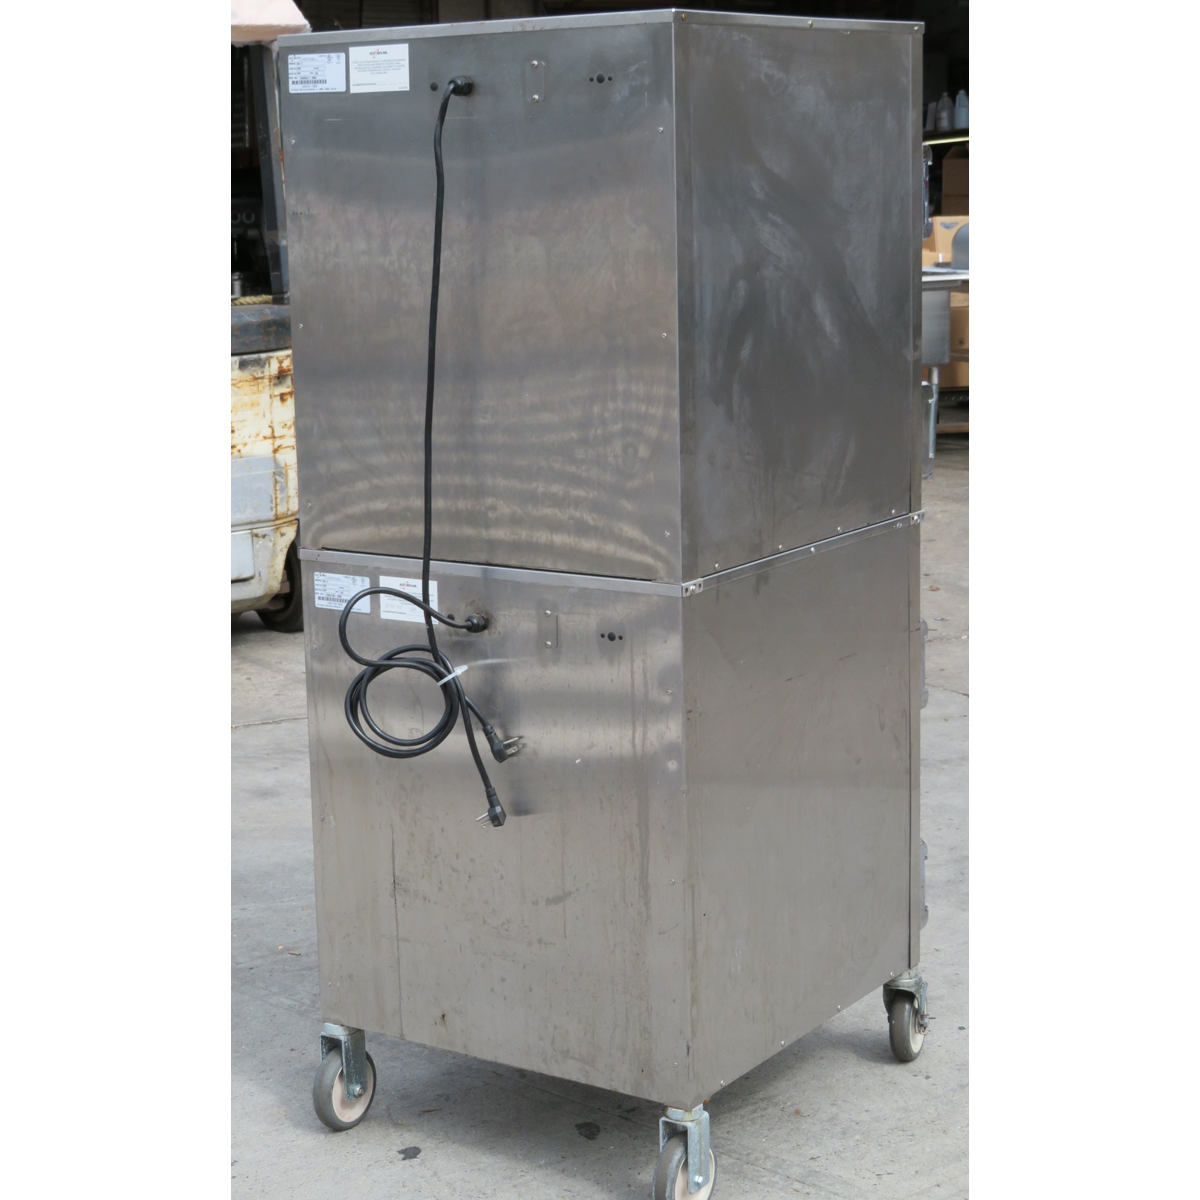 Alto Shaam 750-S 26" Low Temperature Hot Holding Cabinet, Used Very Good Condition image 1